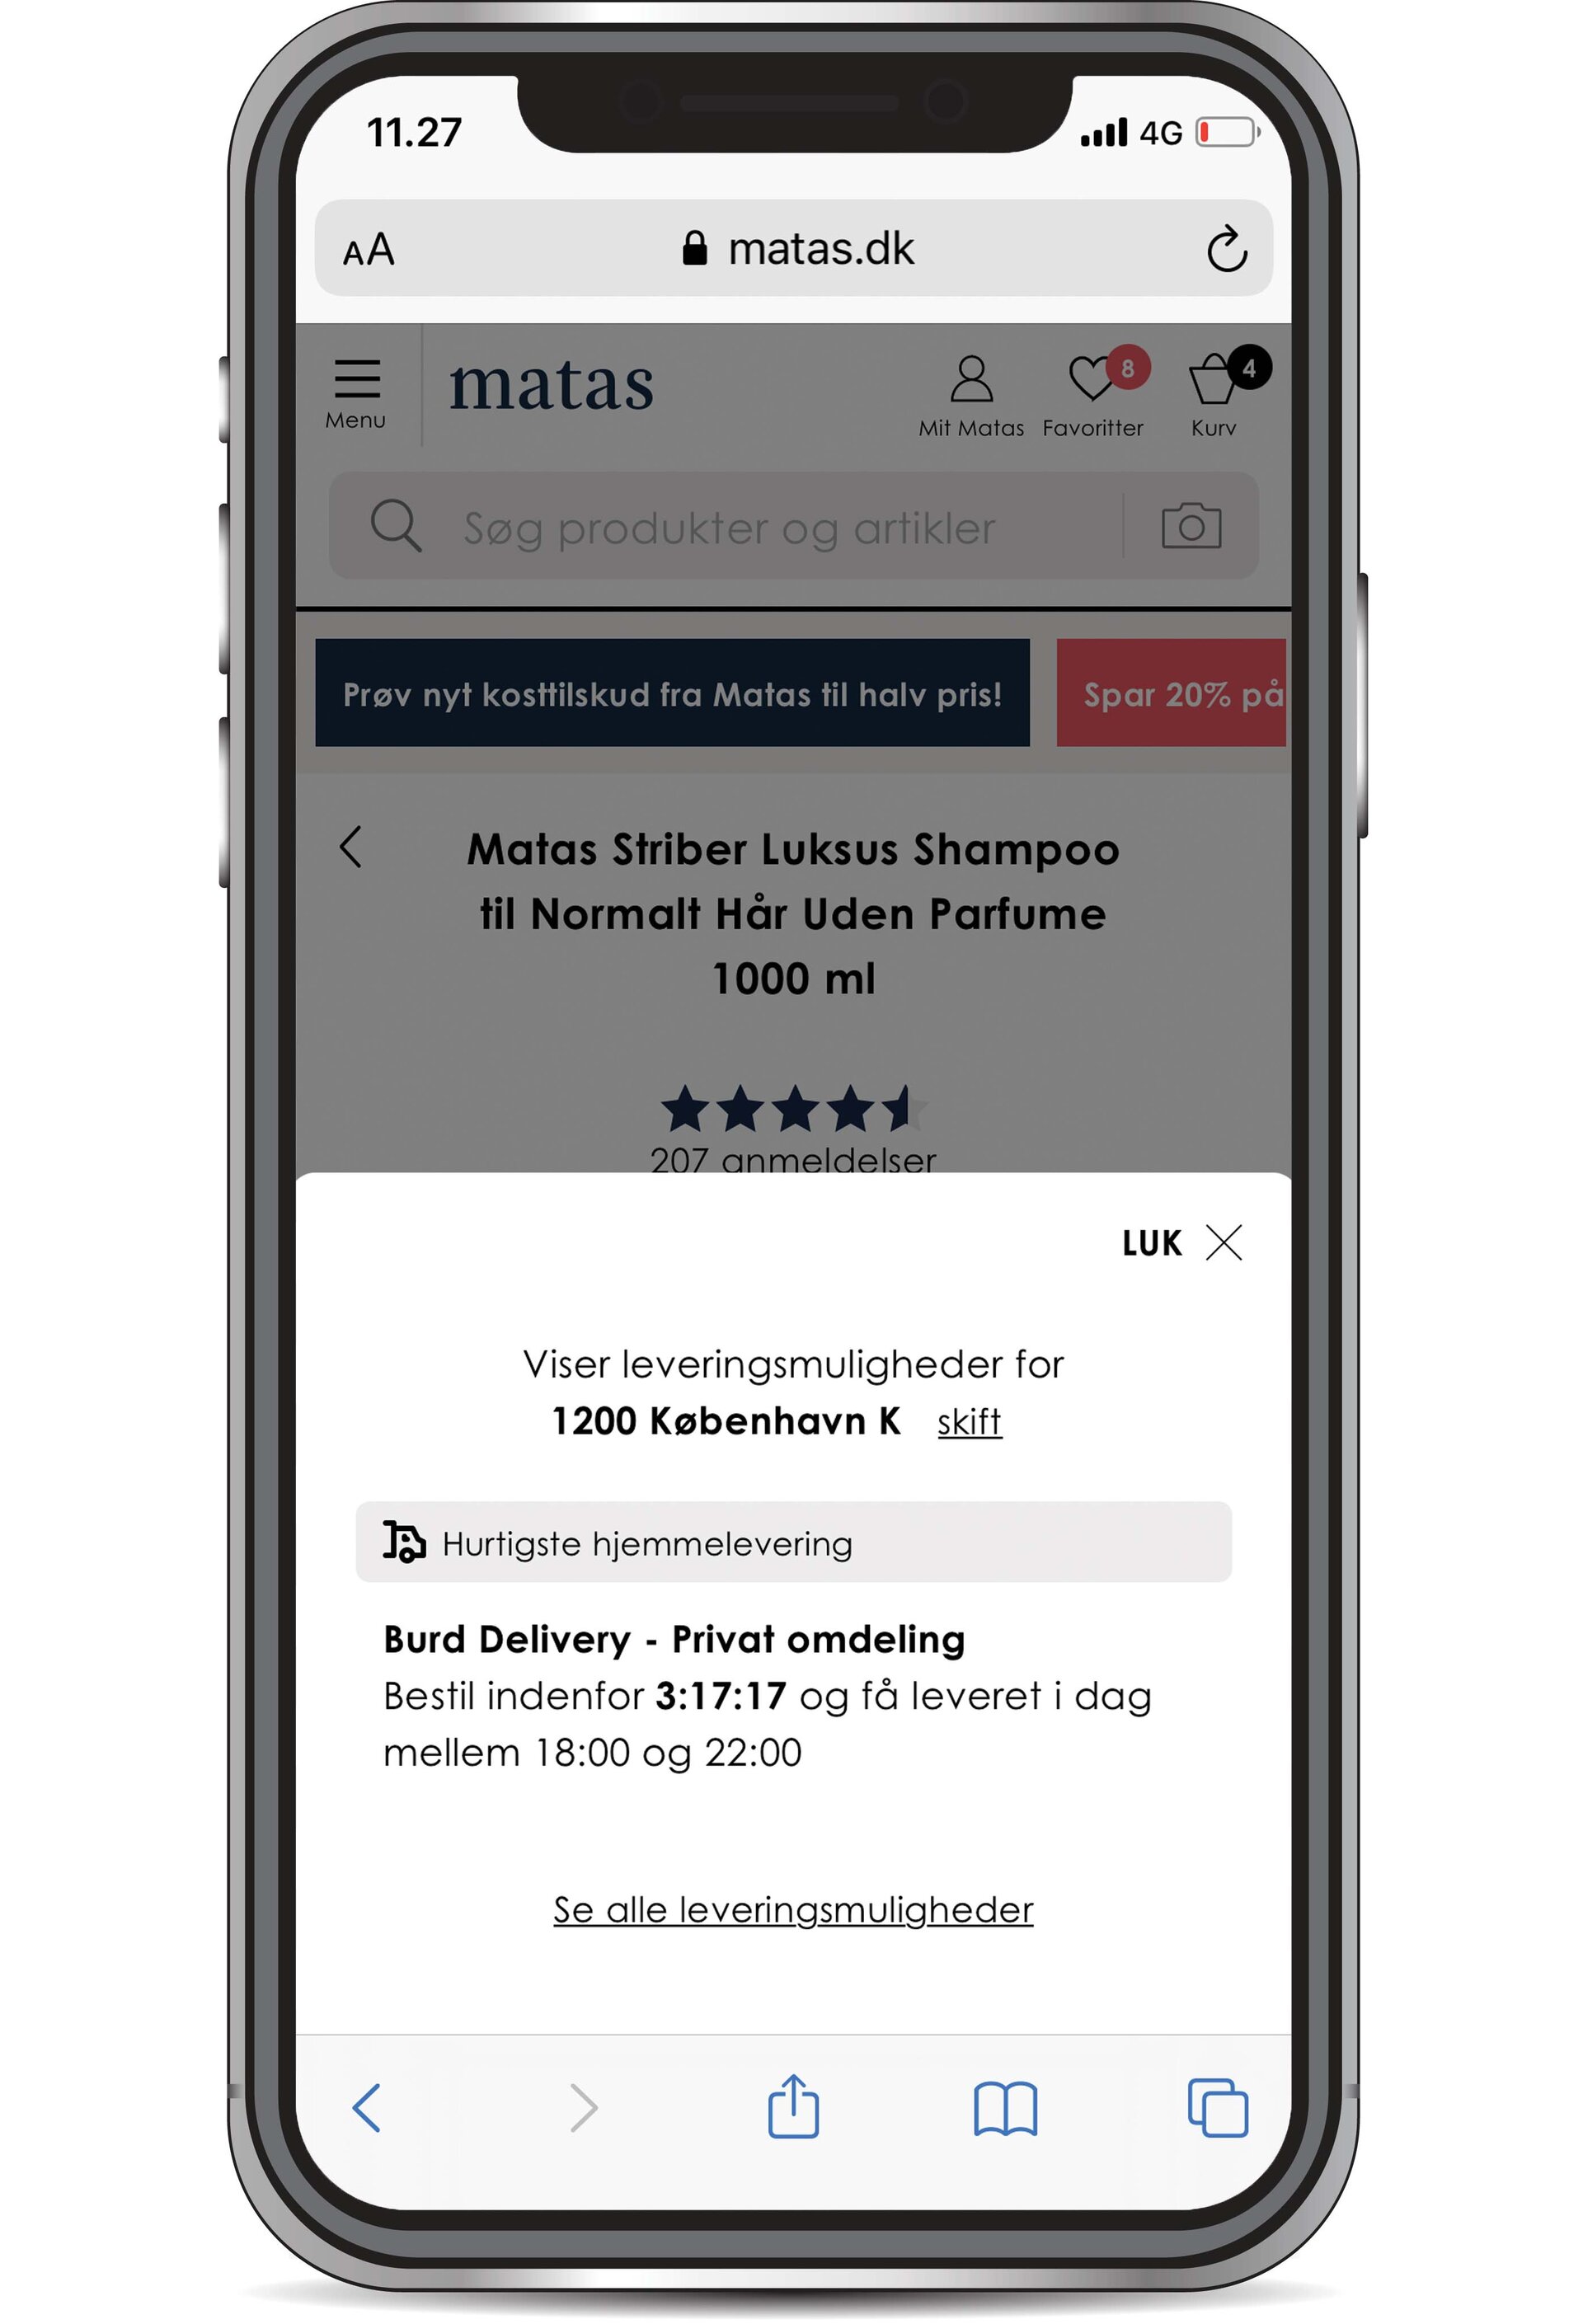 Matas is testing the effect of presenting the delivery options already on the product page and product list